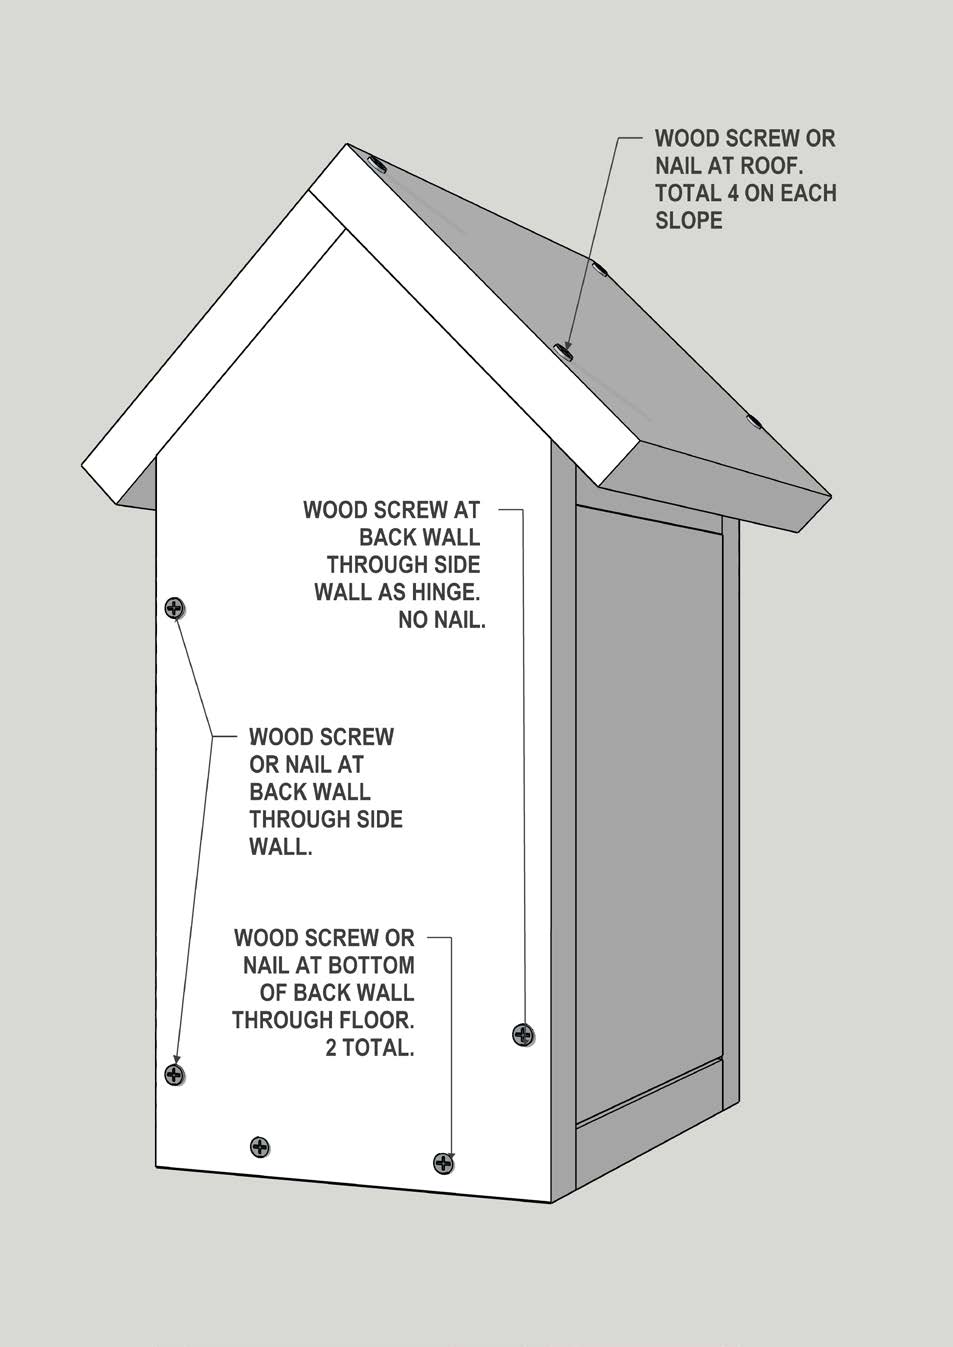 Screw and nail positions at the back of the birdhouse.